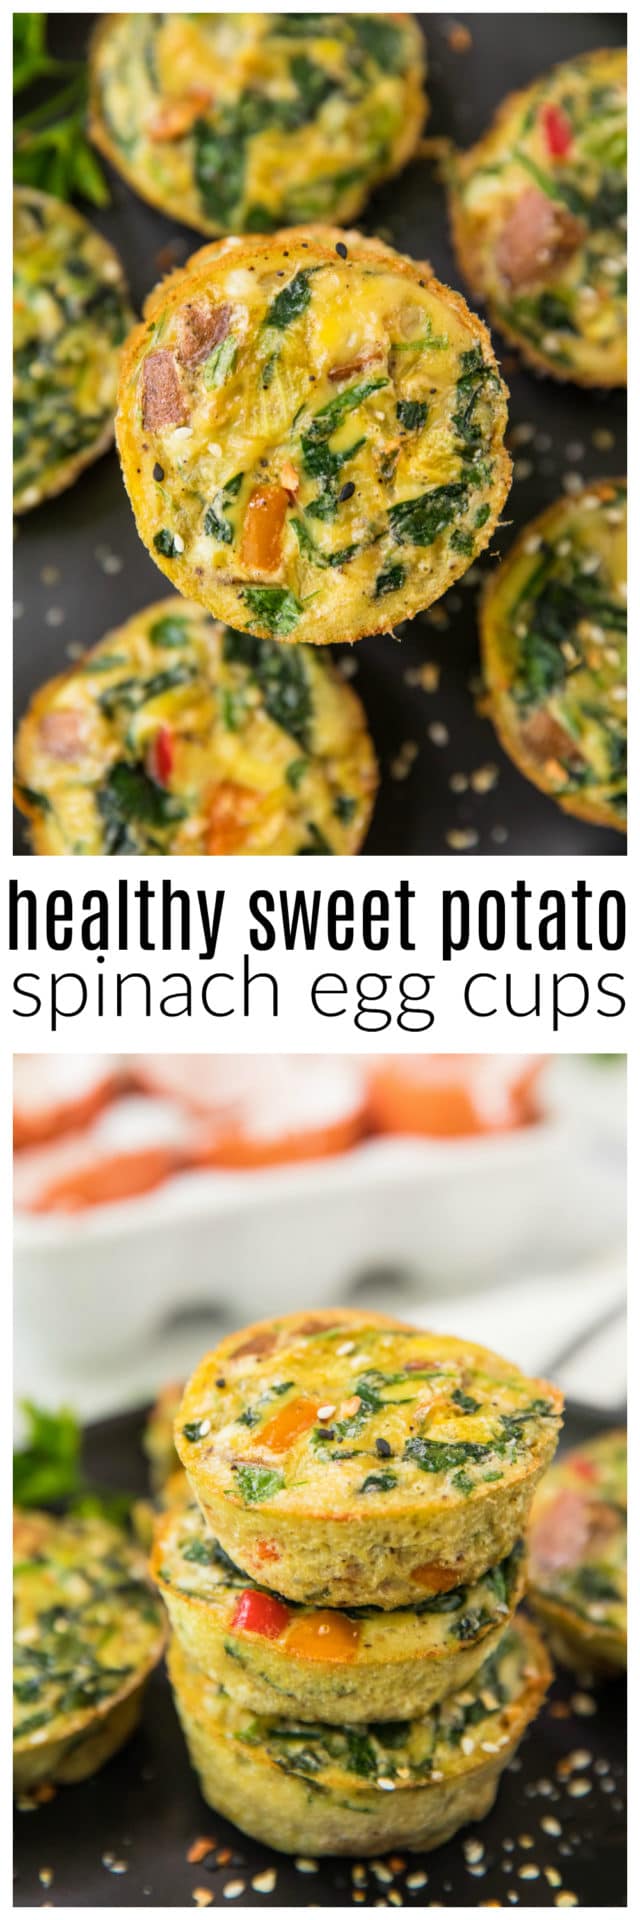 Pinterest image for Healthy Sweet Potato Spinach Egg Cups